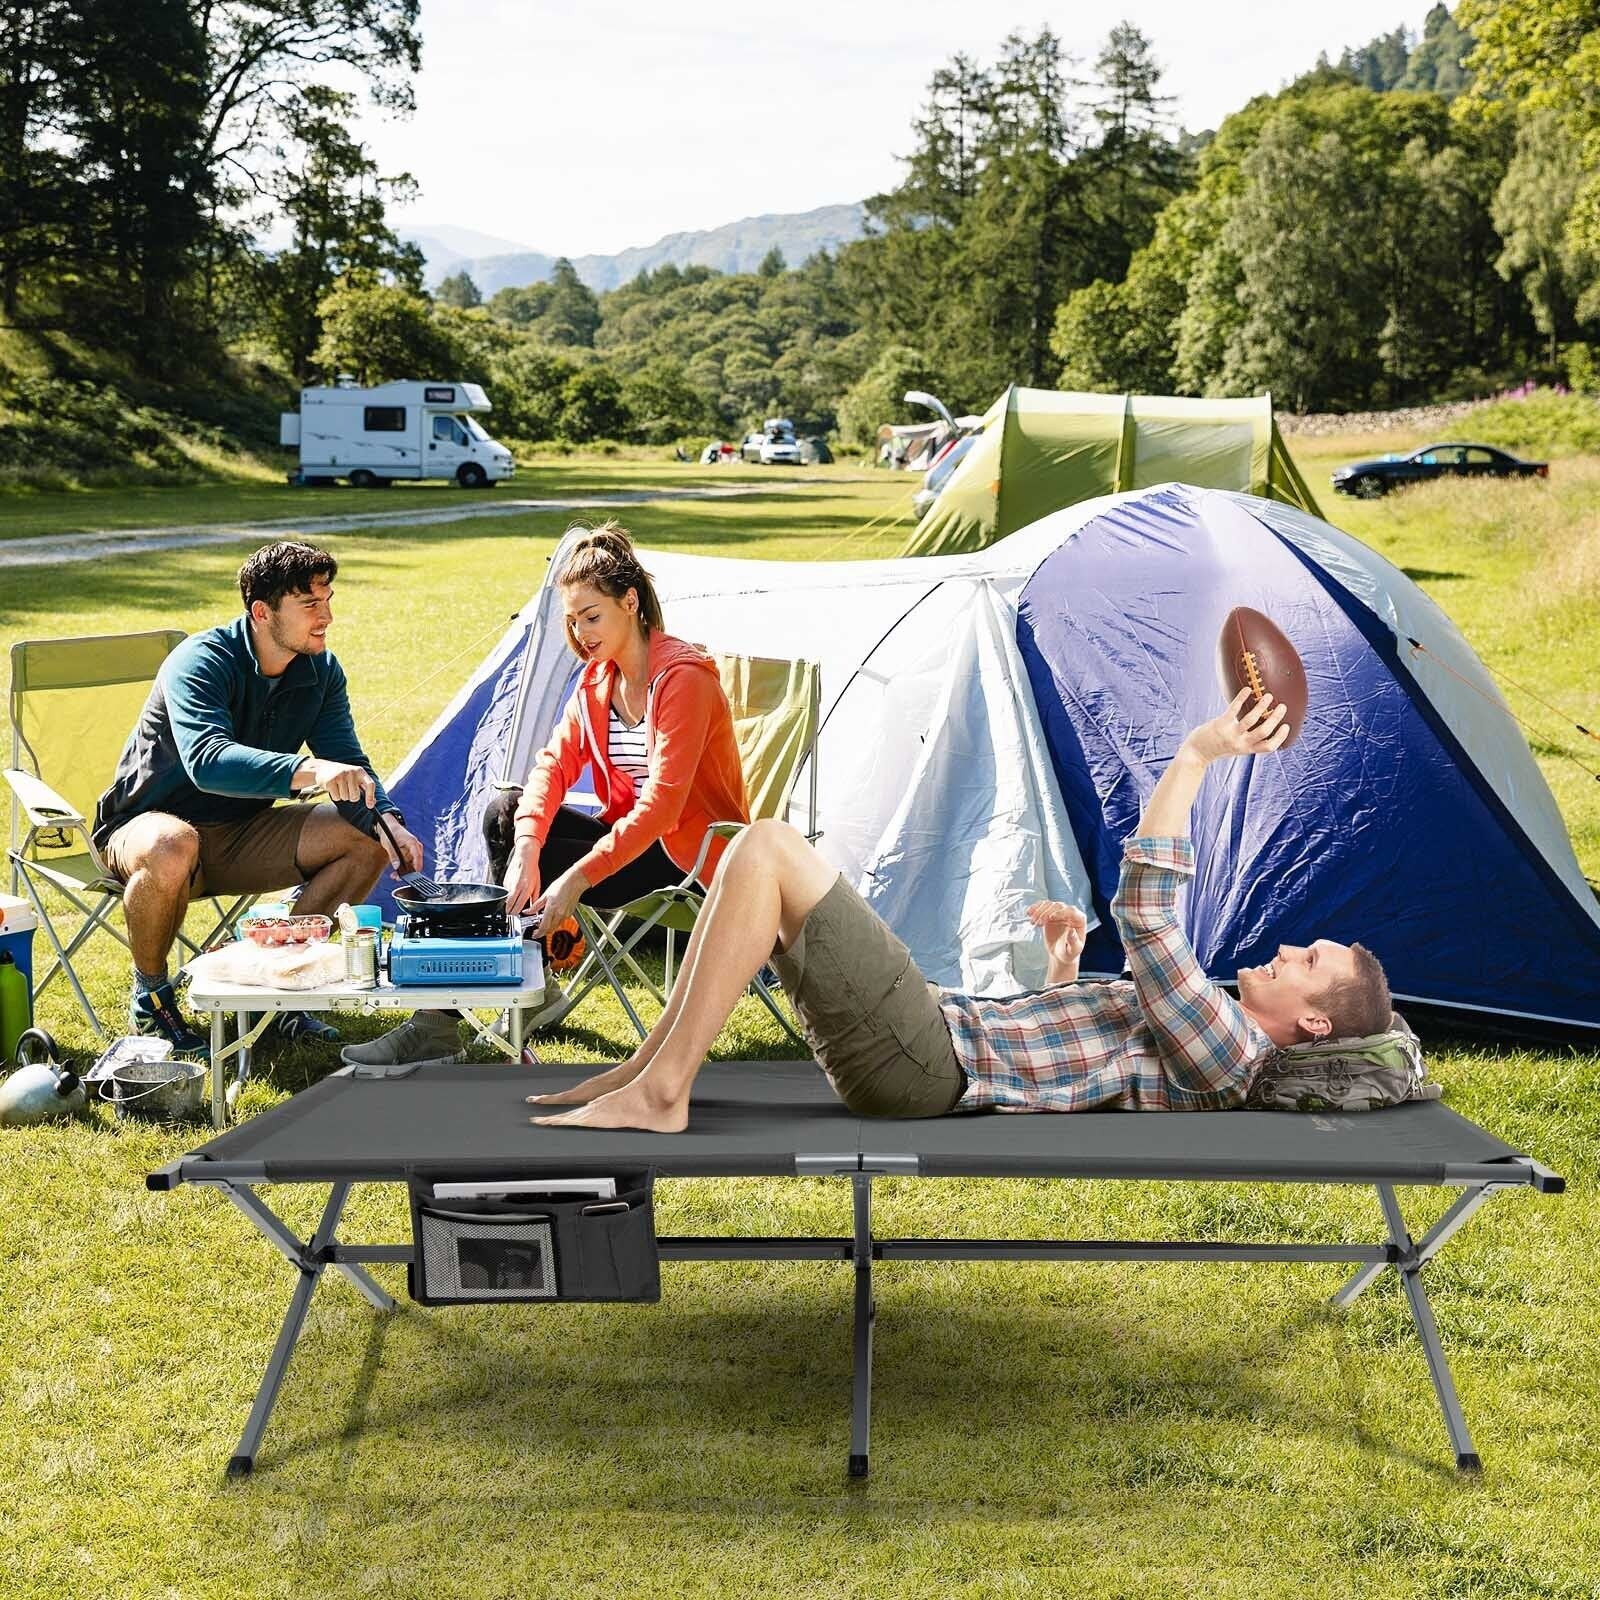 Extra Wide Folding Camping Bed with Carry Bag and Storage Bag, Gray - Gallery Canada